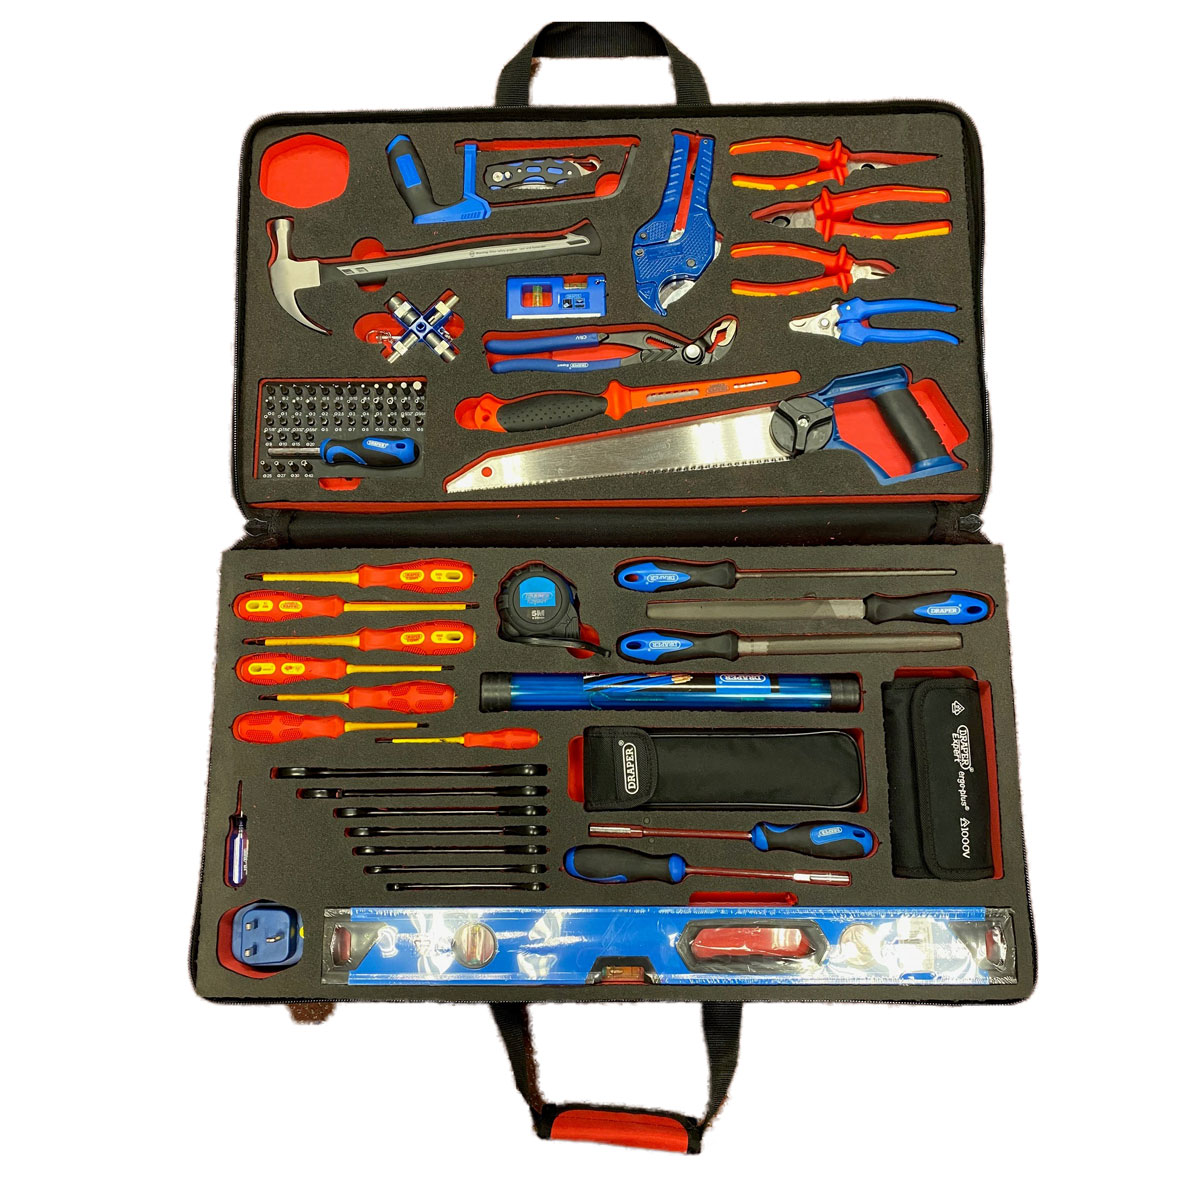 Electricians Kit - DR33 - Red Box Tools